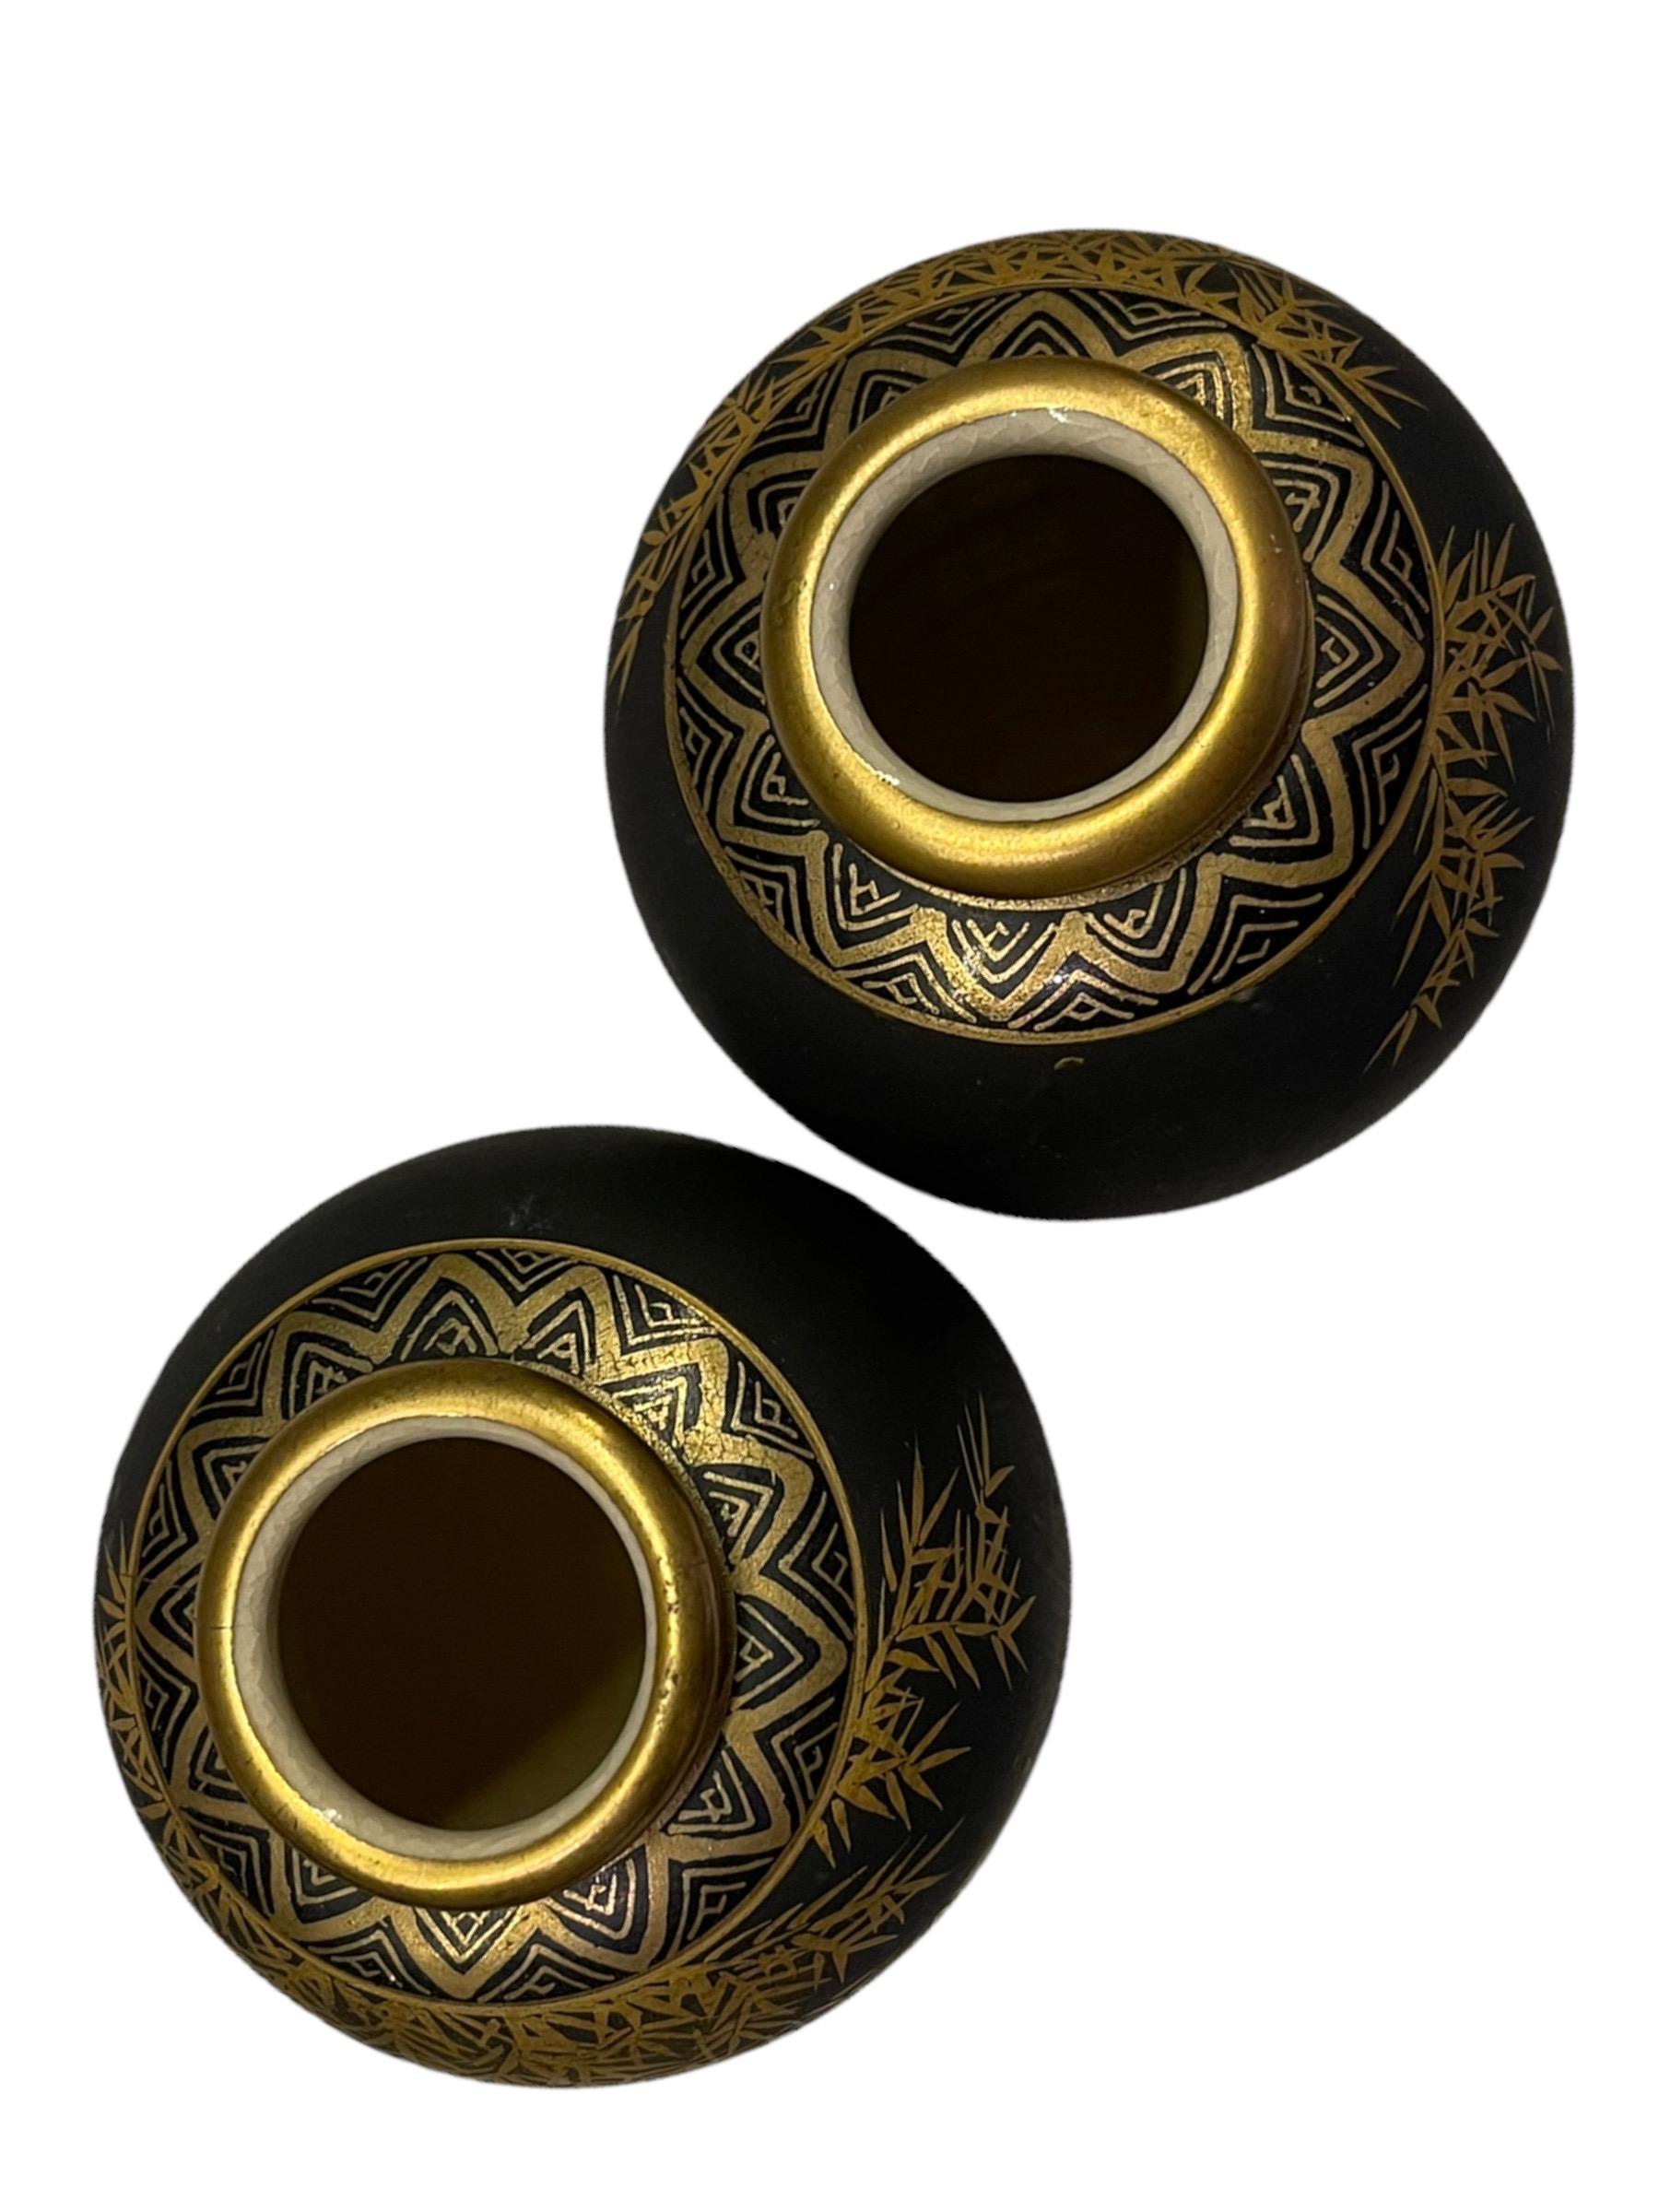 Early 20th Century Pair of Small Japanese Kutani Porcelain Damascene Vases In Fair Condition For Sale In North Miami, FL